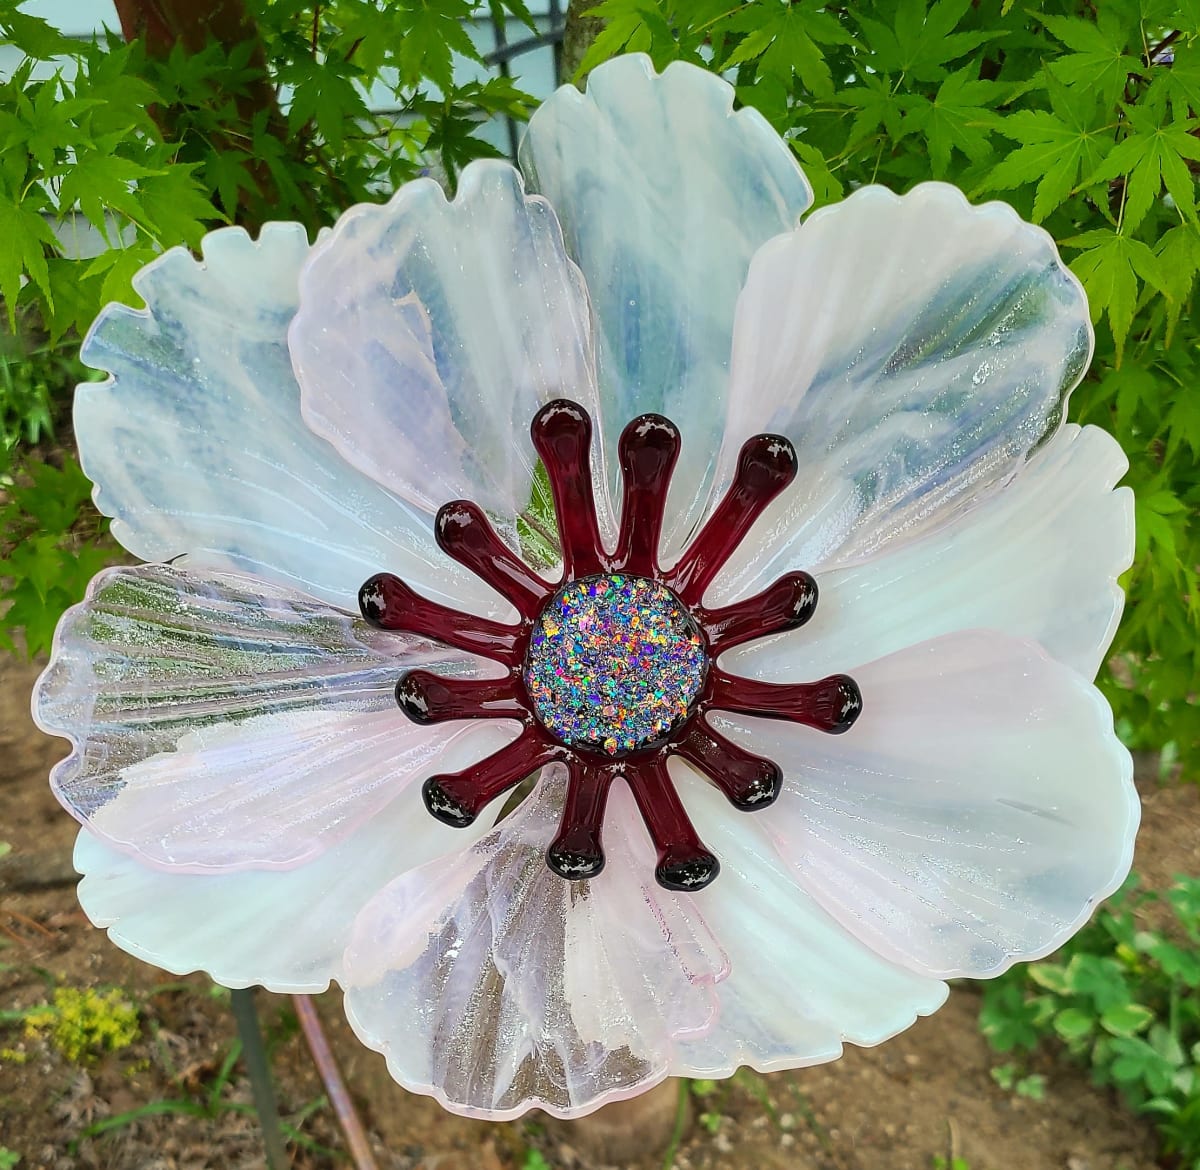 Garden Flower-Pink/White Streaky with Cranberry Stamens and Dichroic Center by Kathy Kollenburn 